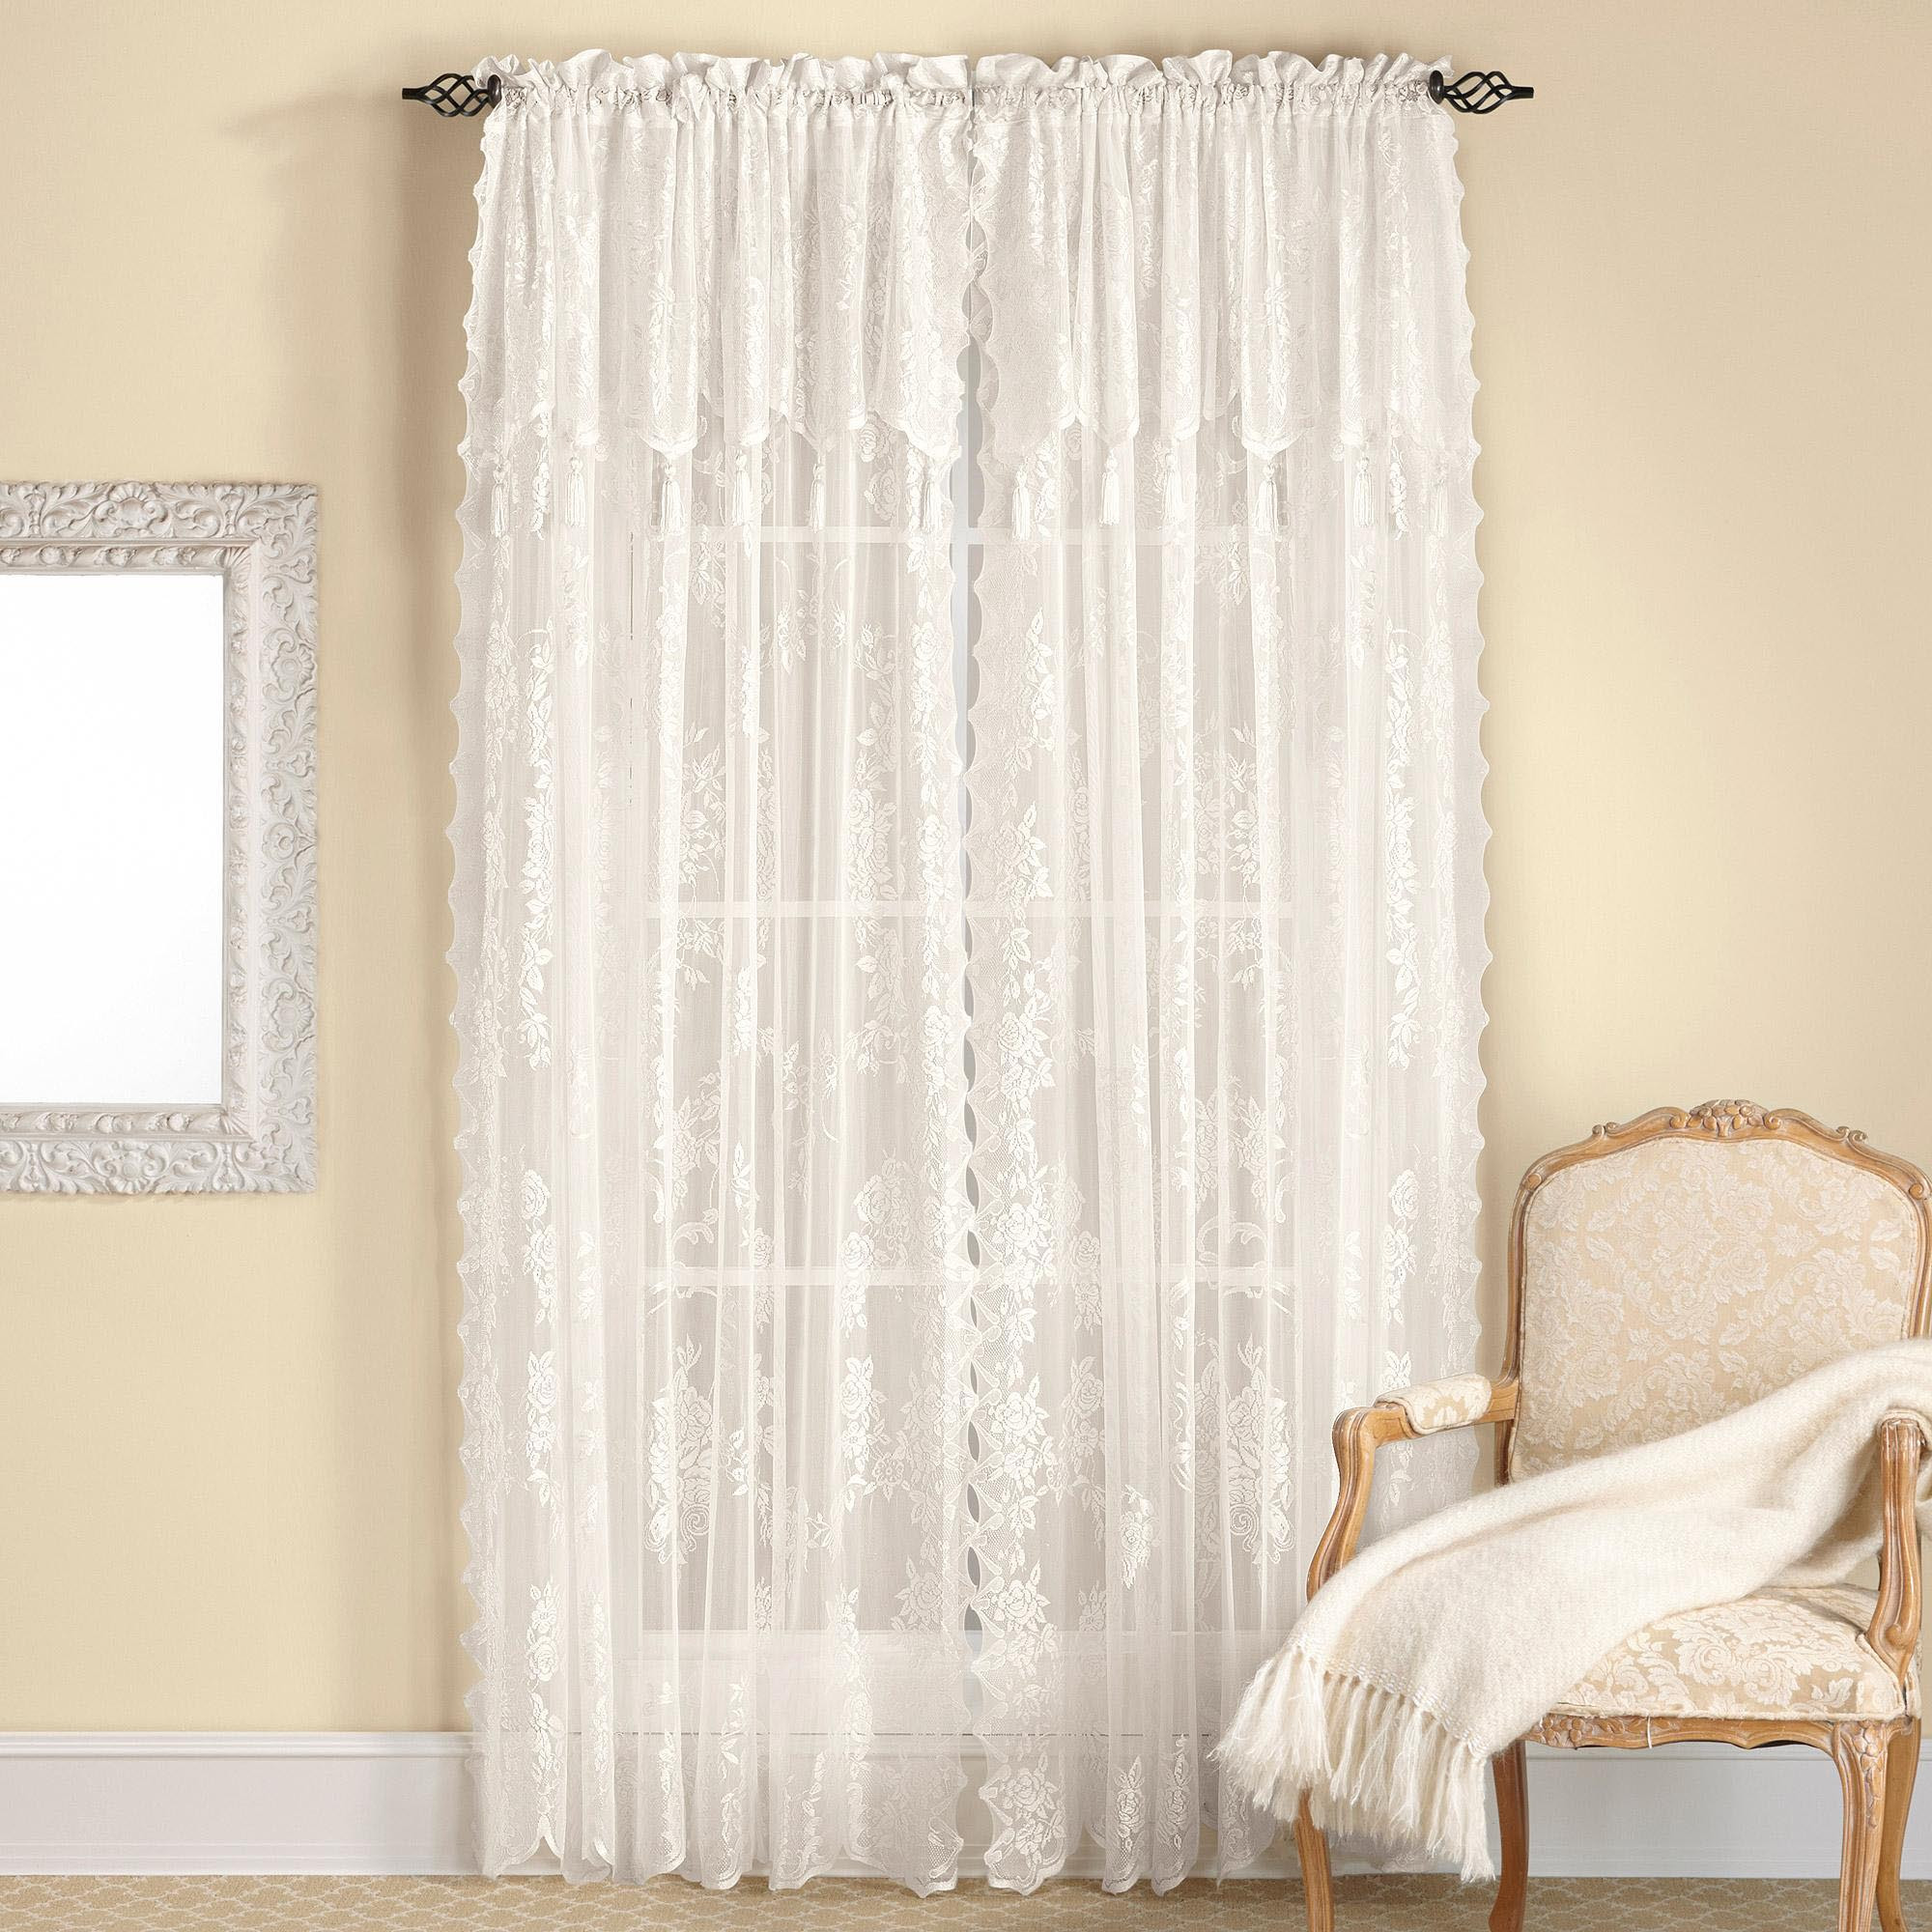 Living Room Curtains With Valance
 Living Room Curtains With Attached Valance